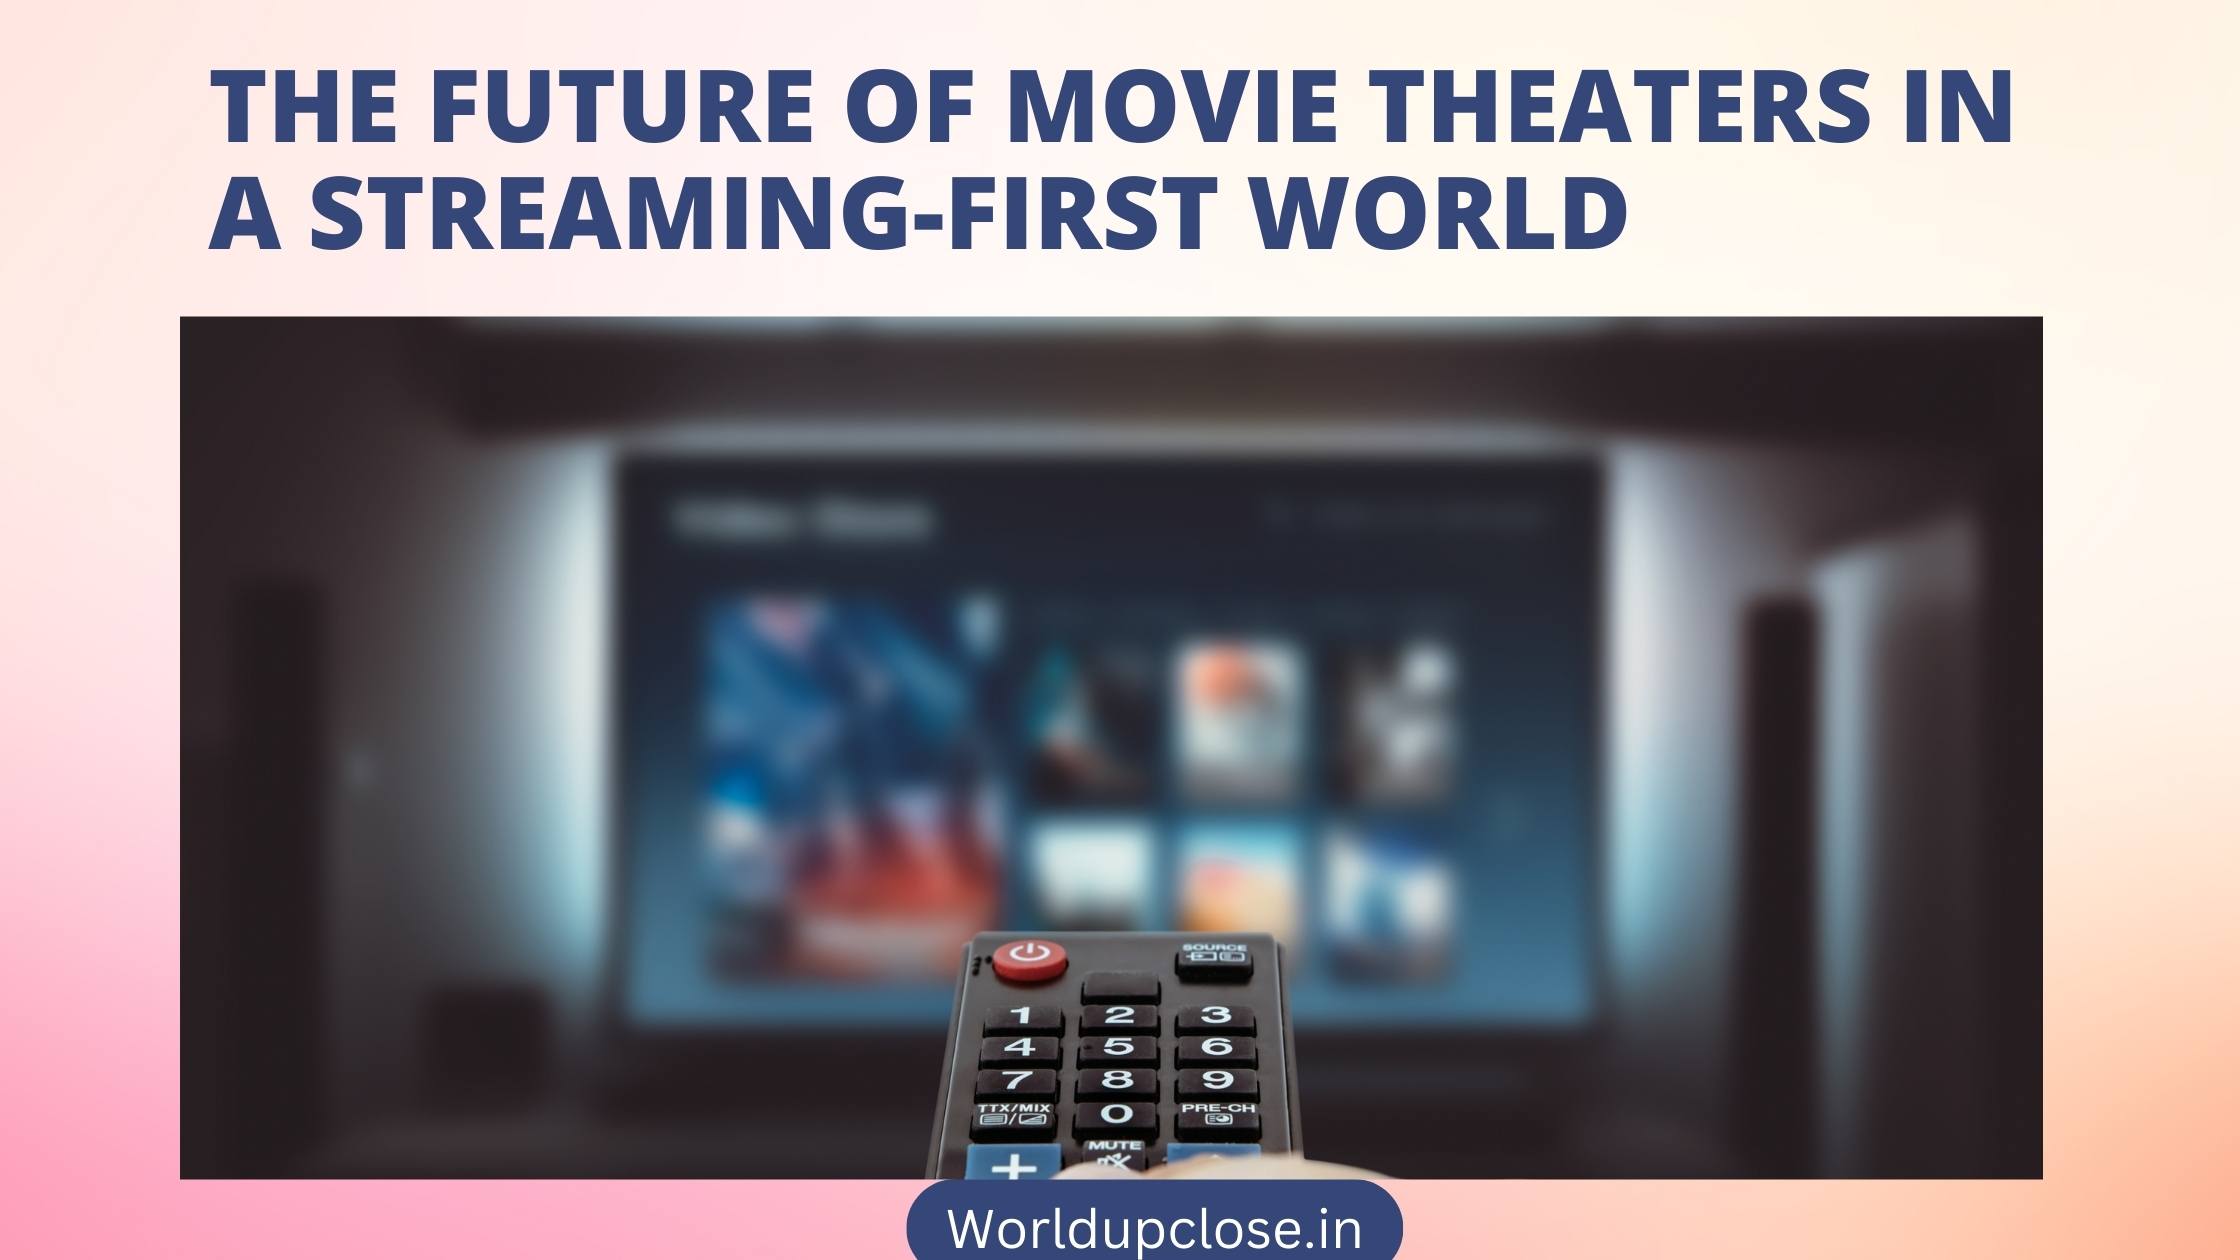 The Future of Movie Theatres in a Streaming-First World 42